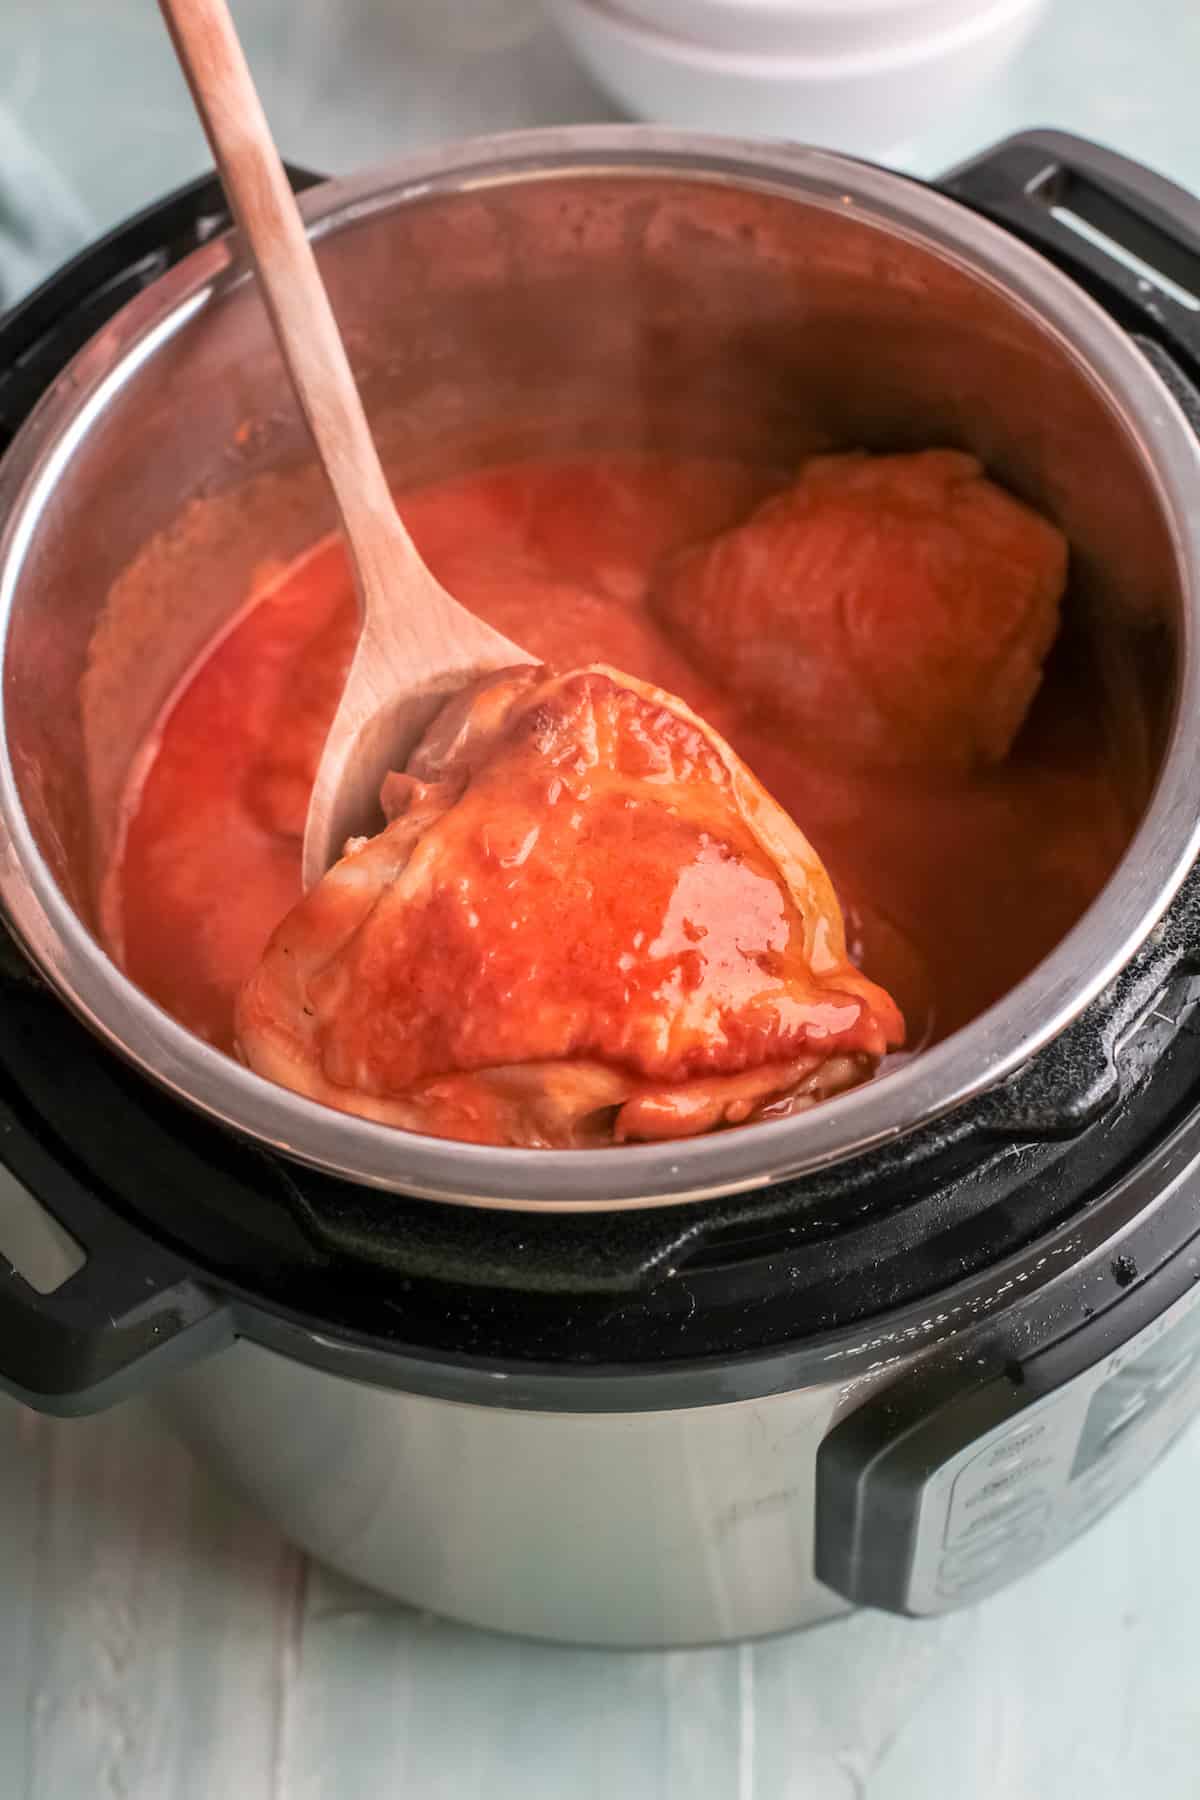 the finished chicken paprikash inside the instant pot